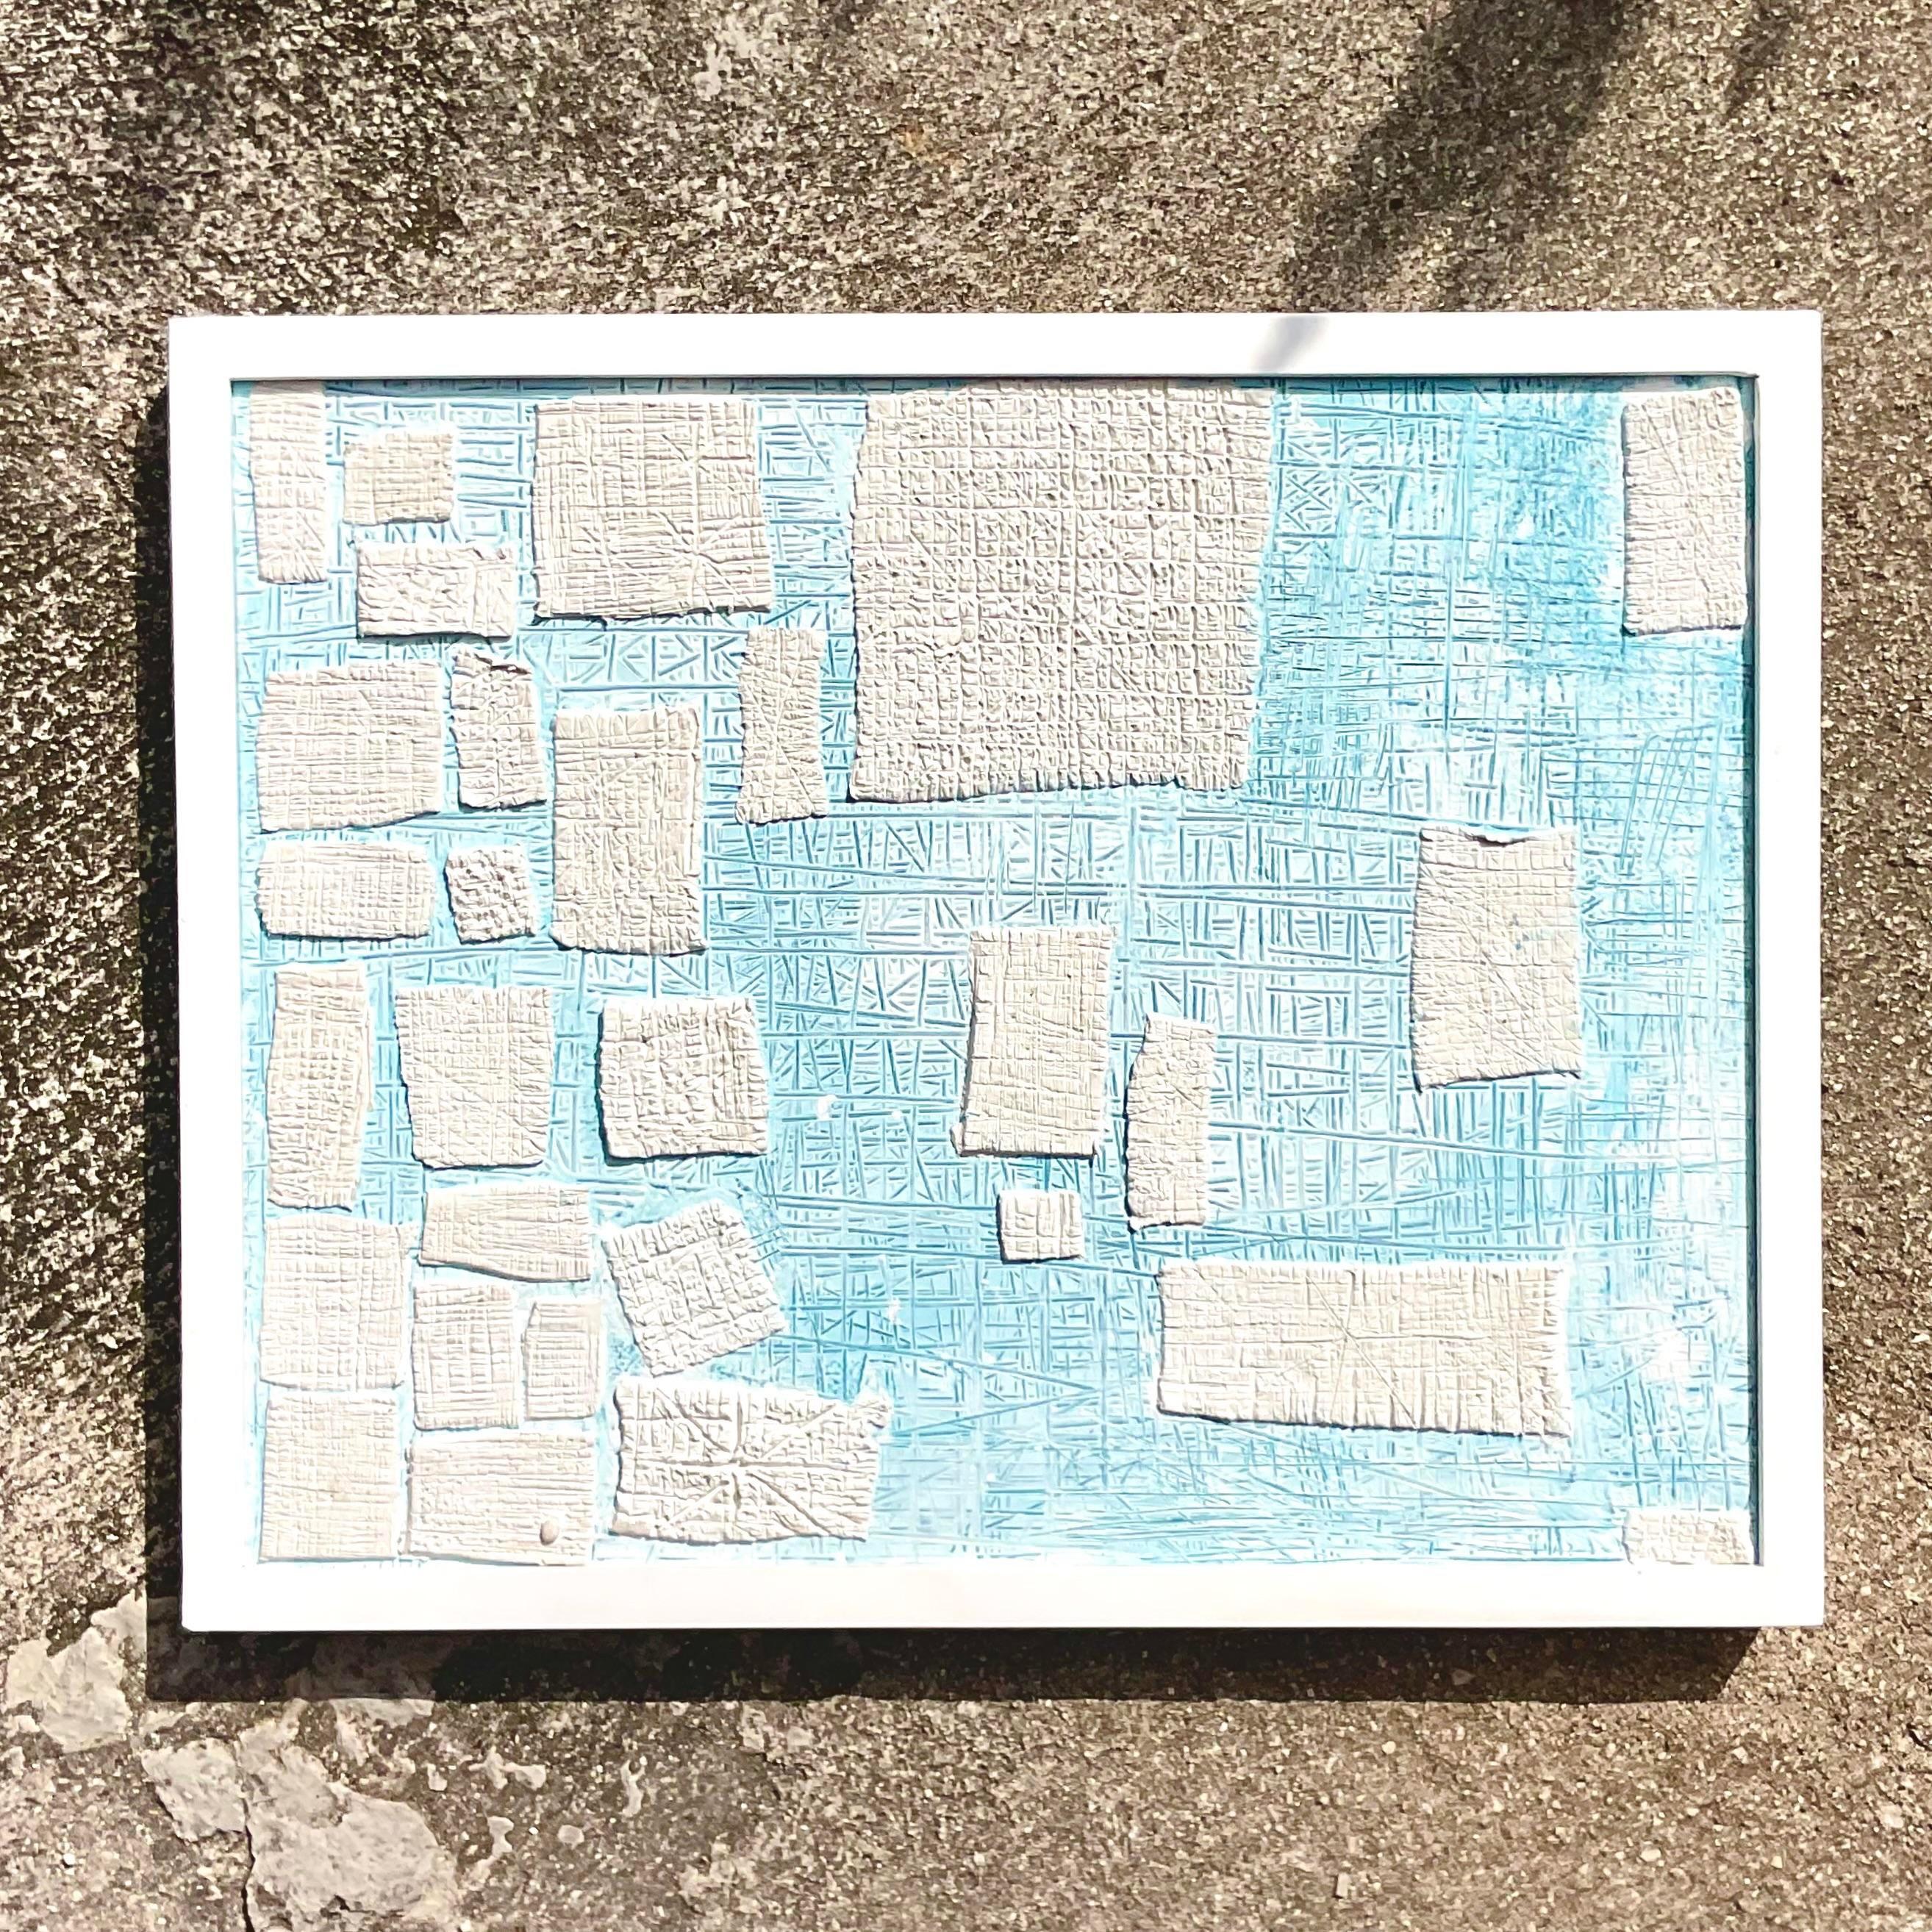 A fantastic vintage Contemporary original Abstract painting. A striking mixed media by Scottish artist Niki Smith. A composition of ceramic on Sgrafitto in pale blue and white. Signed on verso. Acquired from a Palm Beach estate.